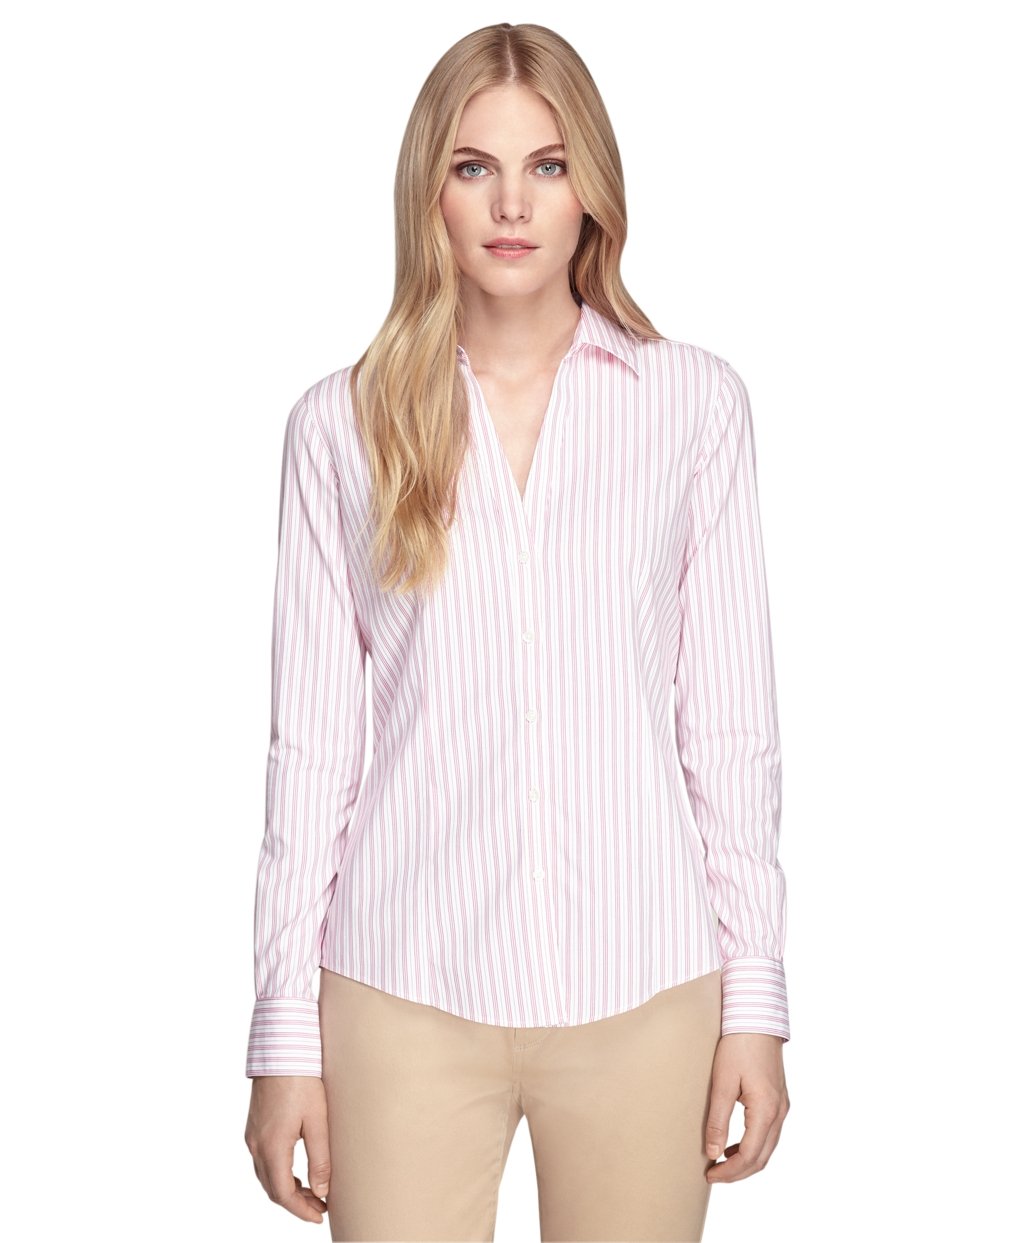 Lyst - Brooks Brothers Non-iron Fitted Stripe Dress Shirt in Pink